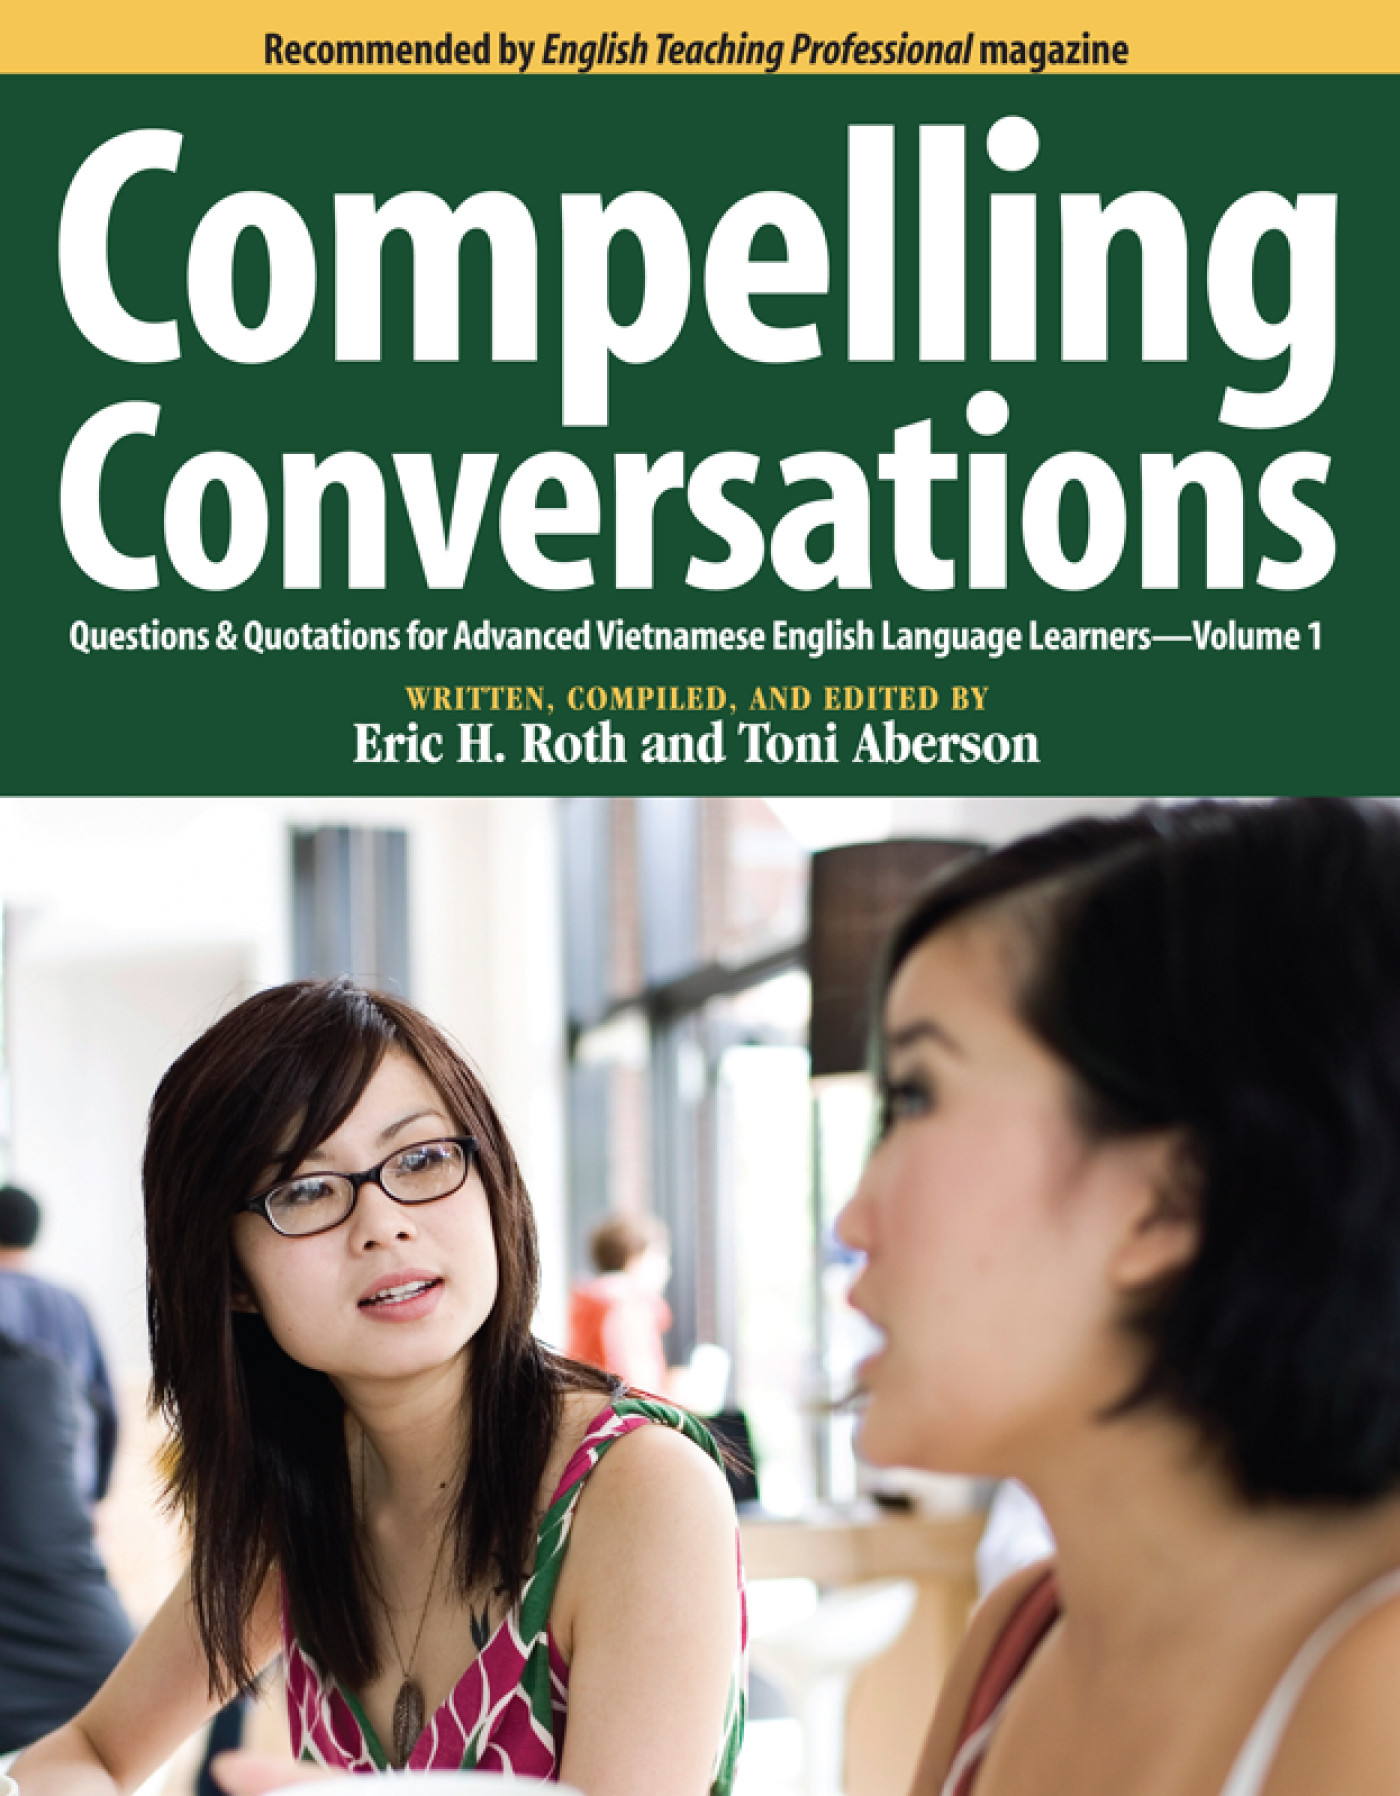 Compelling Conversations: Questions & Quotations for Advanced Vietnamese English Language Learners